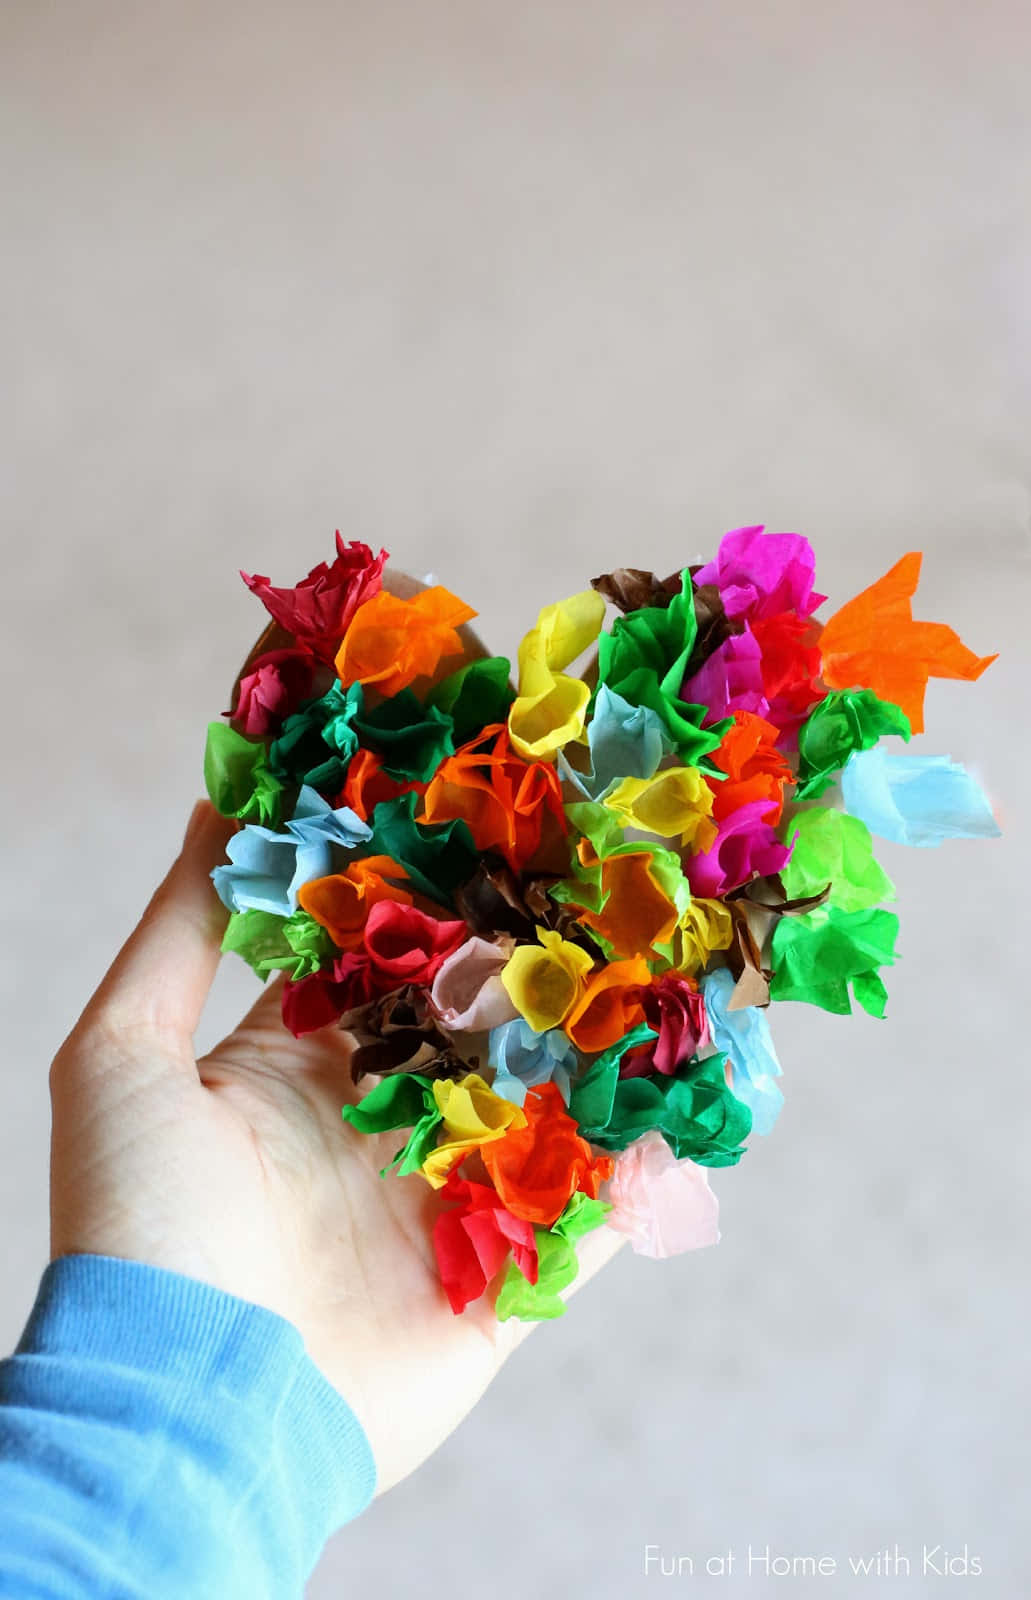 A Person Holding A Heart Made Of Colorful Tissue Paper